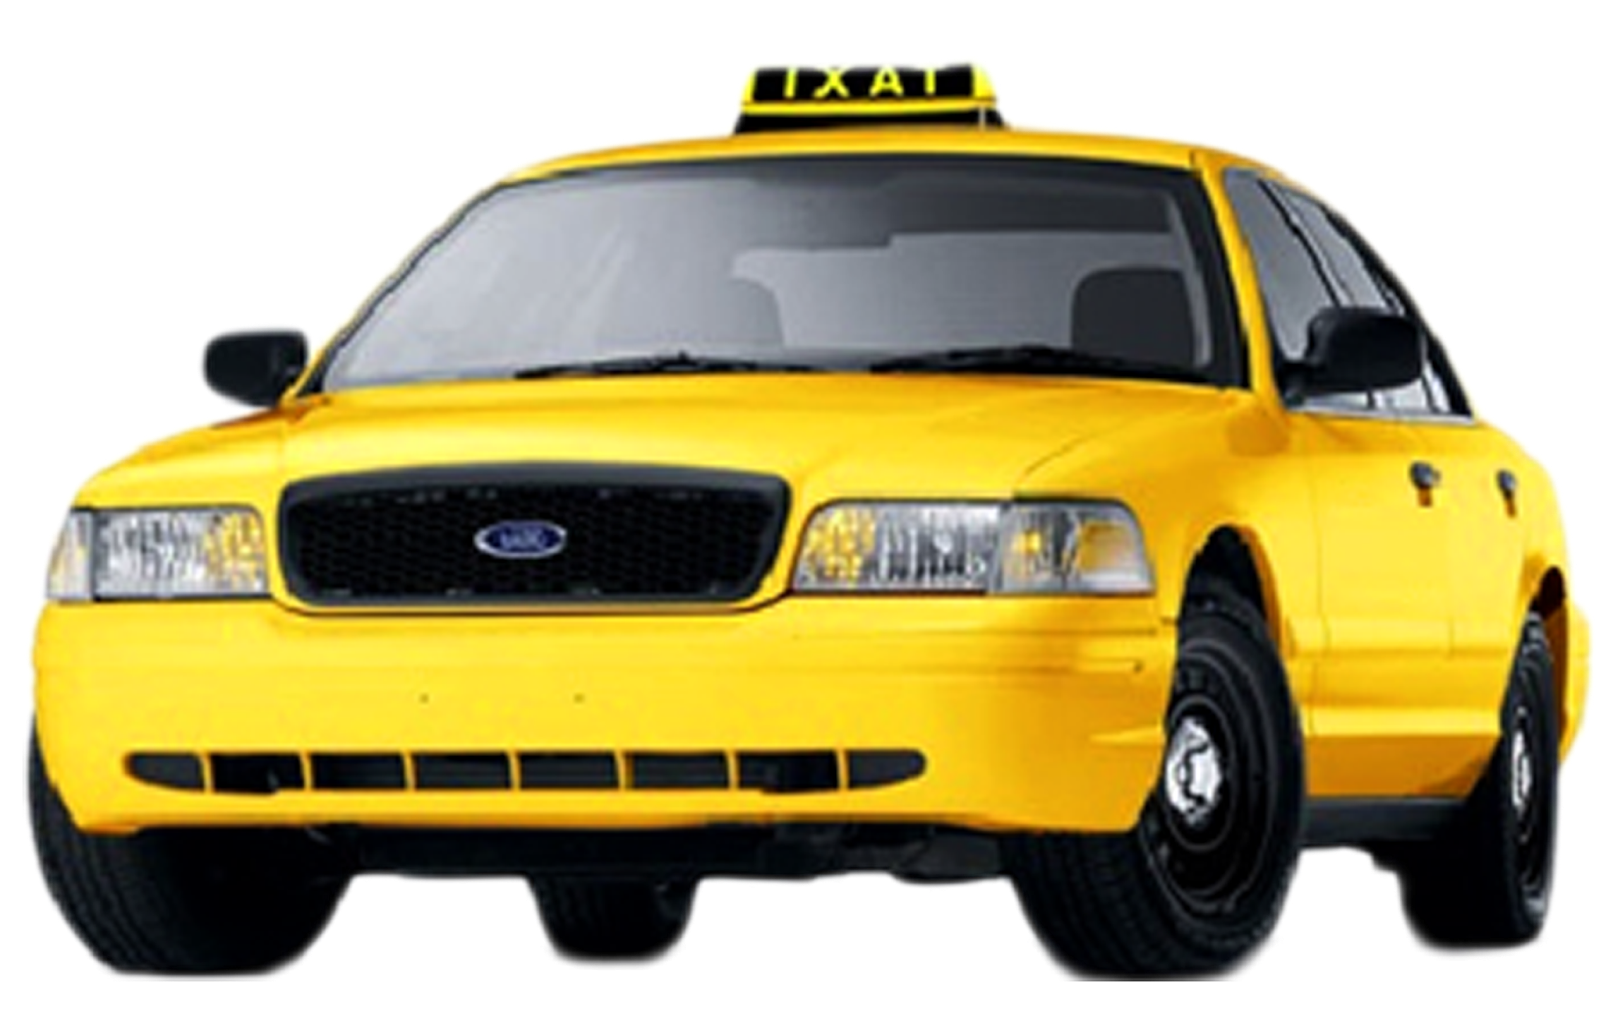 Taxi Cab Free Download Png PN